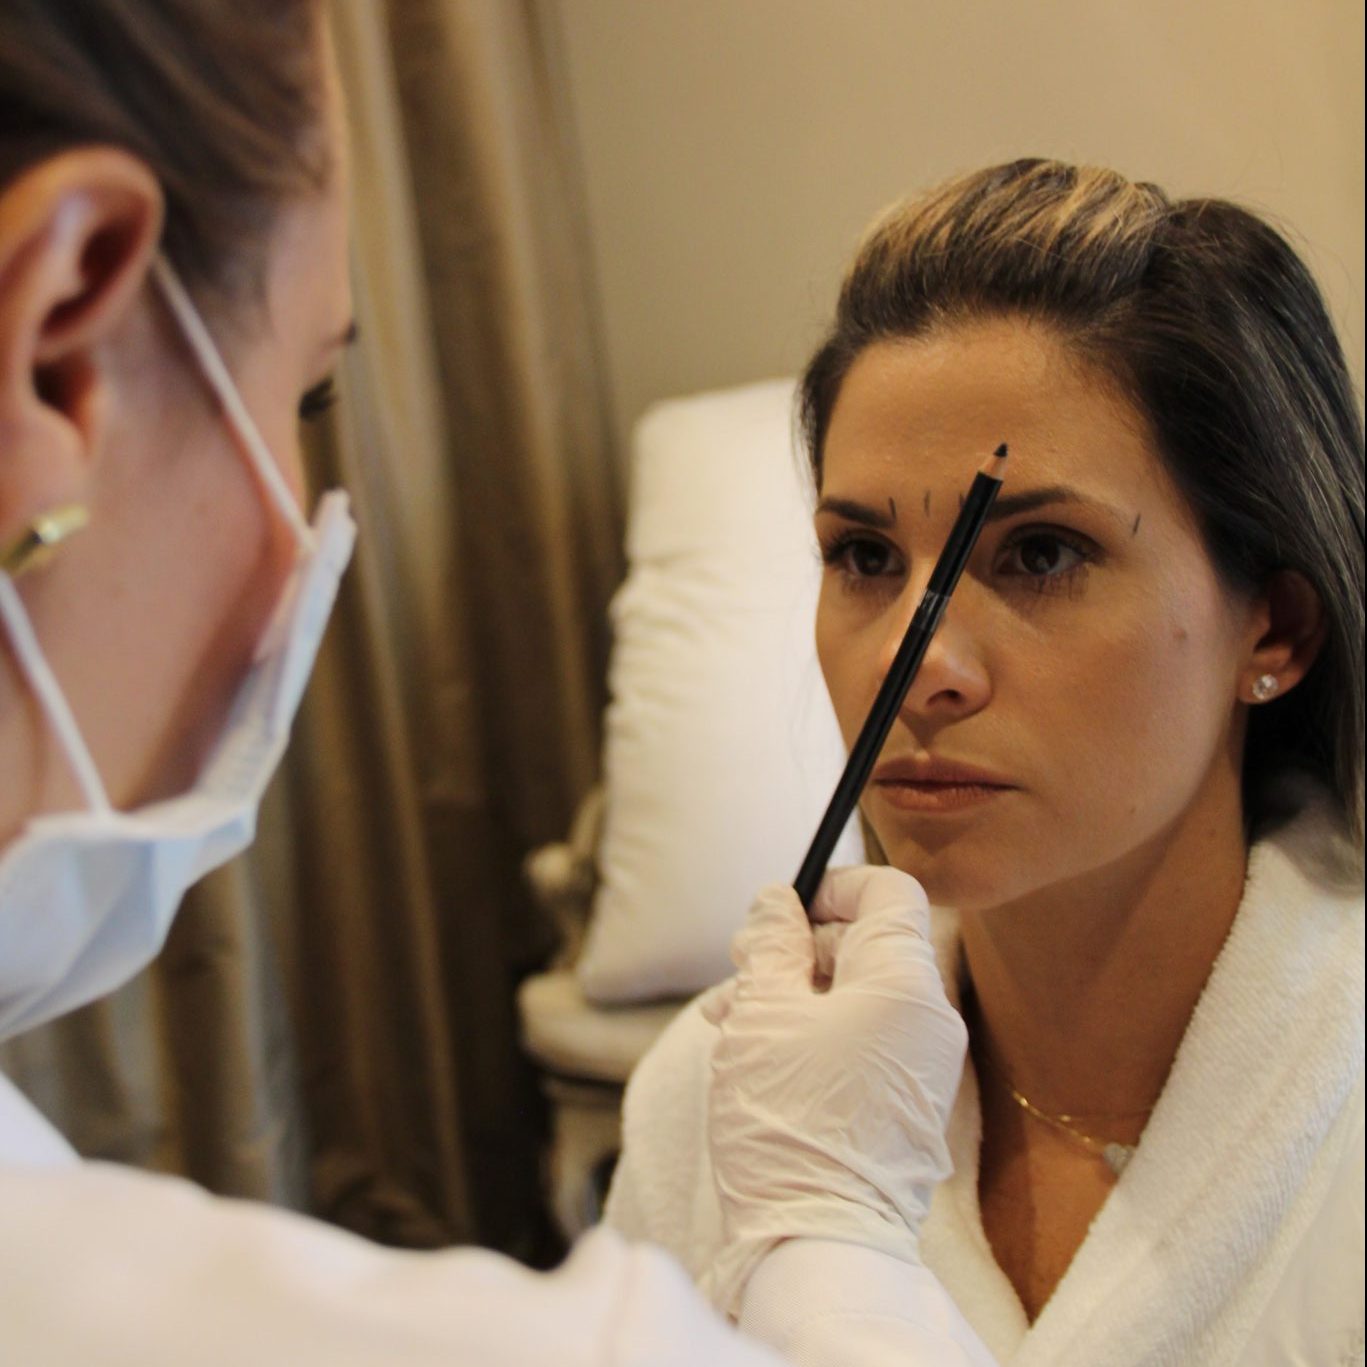 Woman receiving cosmetic facial work from a specialist.